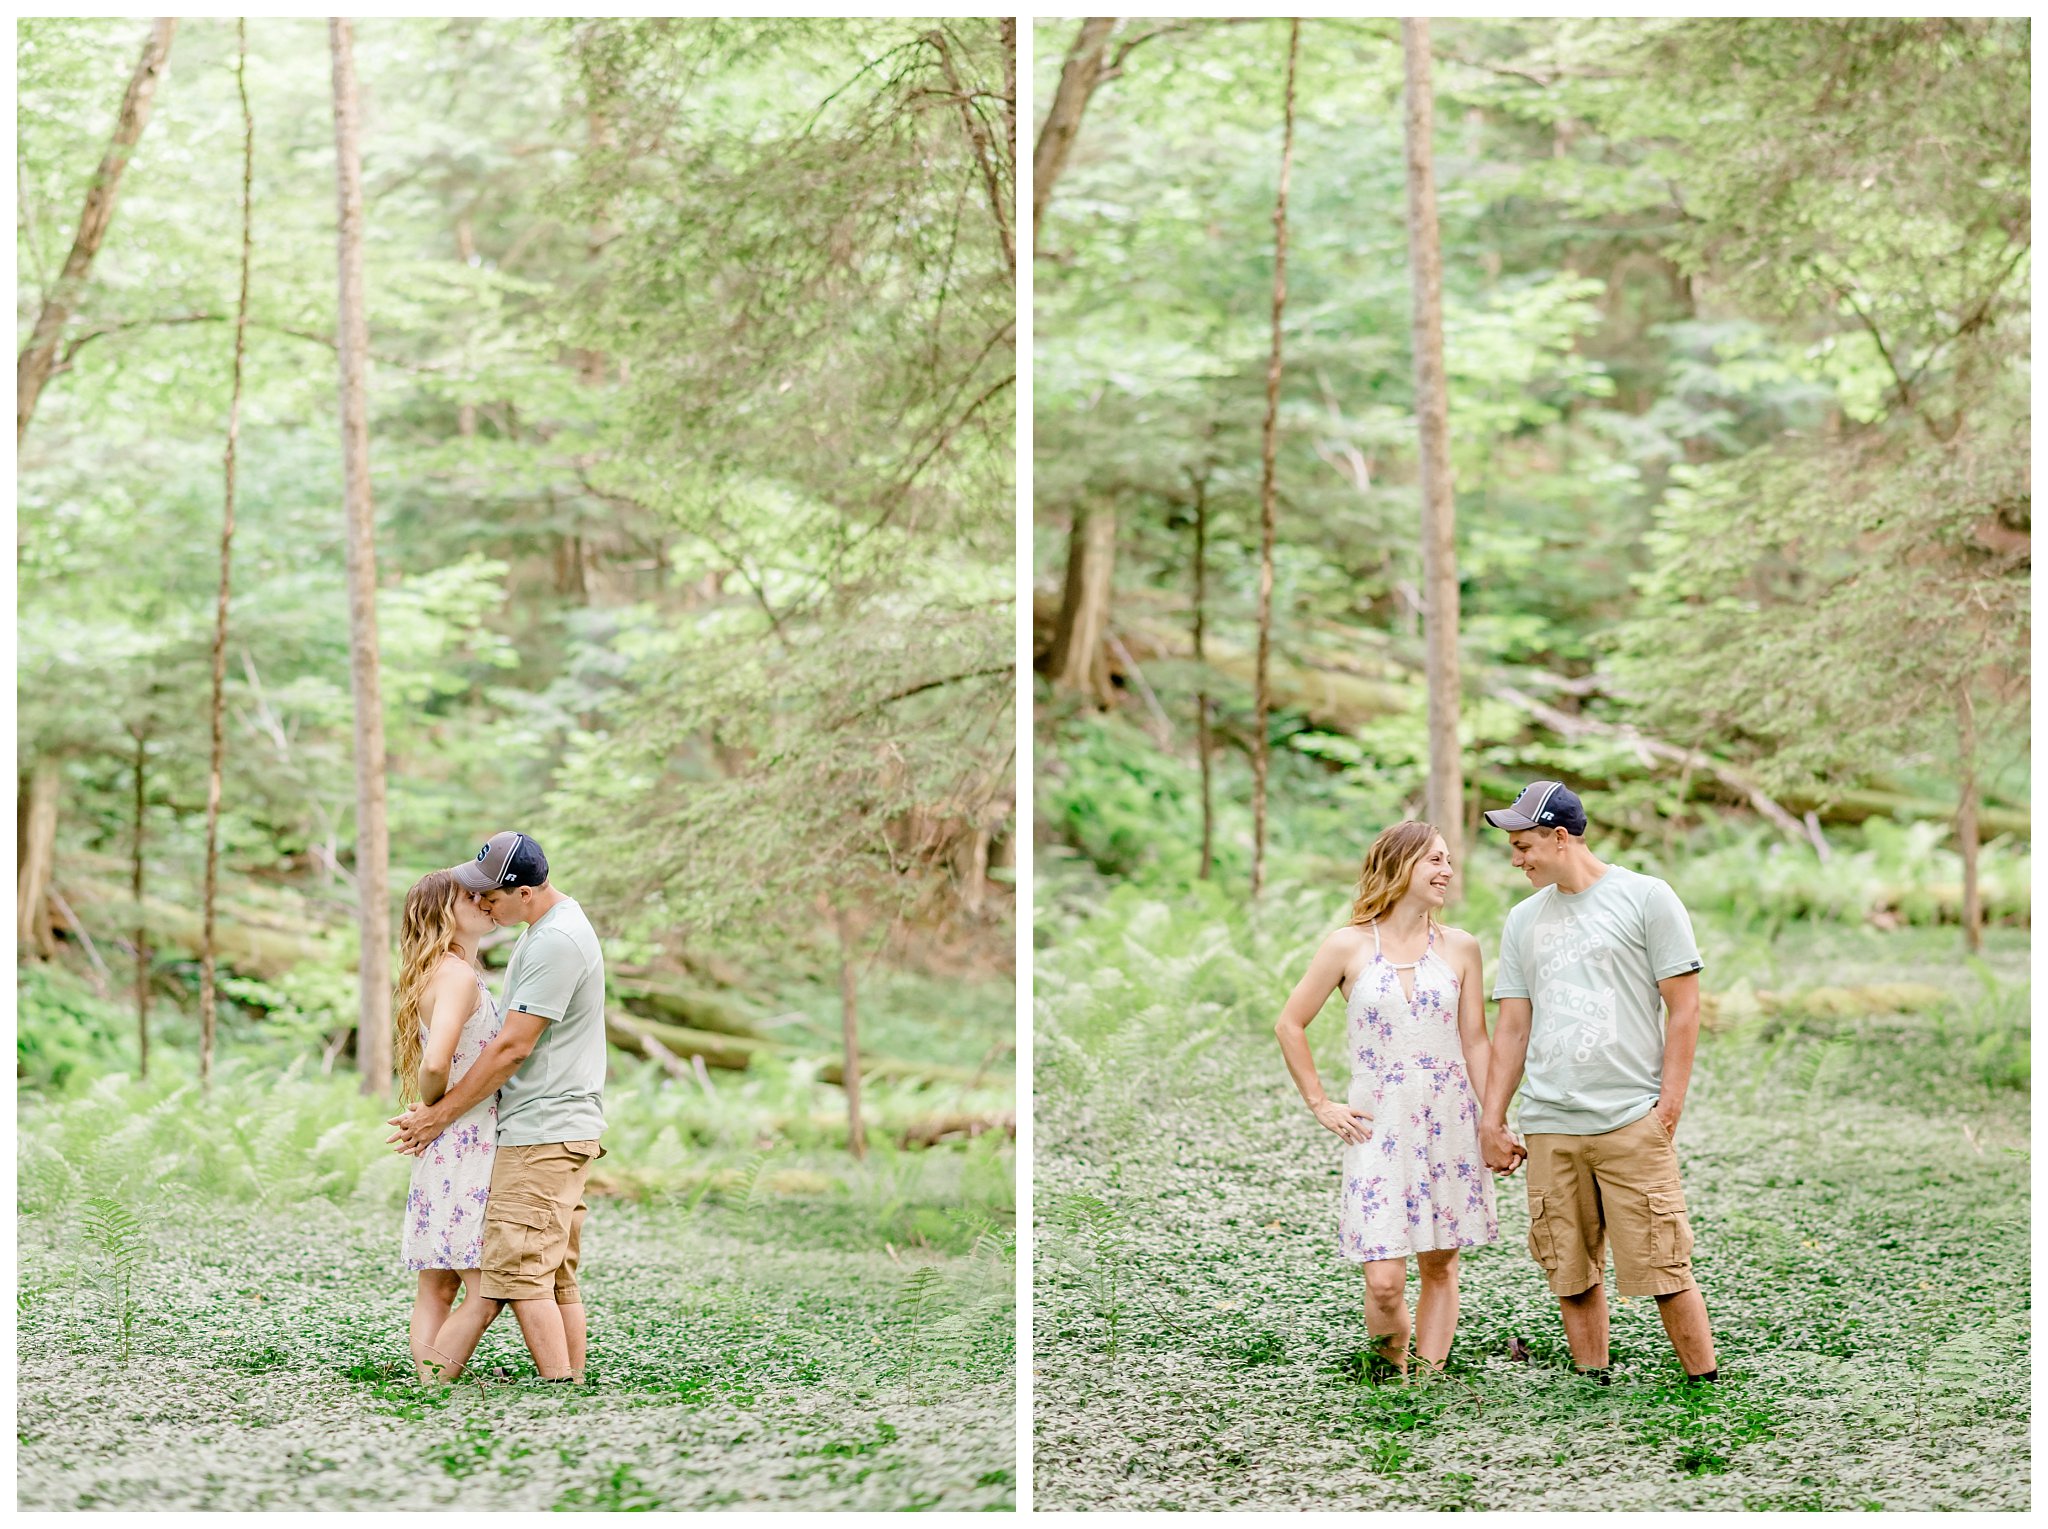 Joanna Young Photography Elizabeth and Cody Engagement Session_0022.jpg